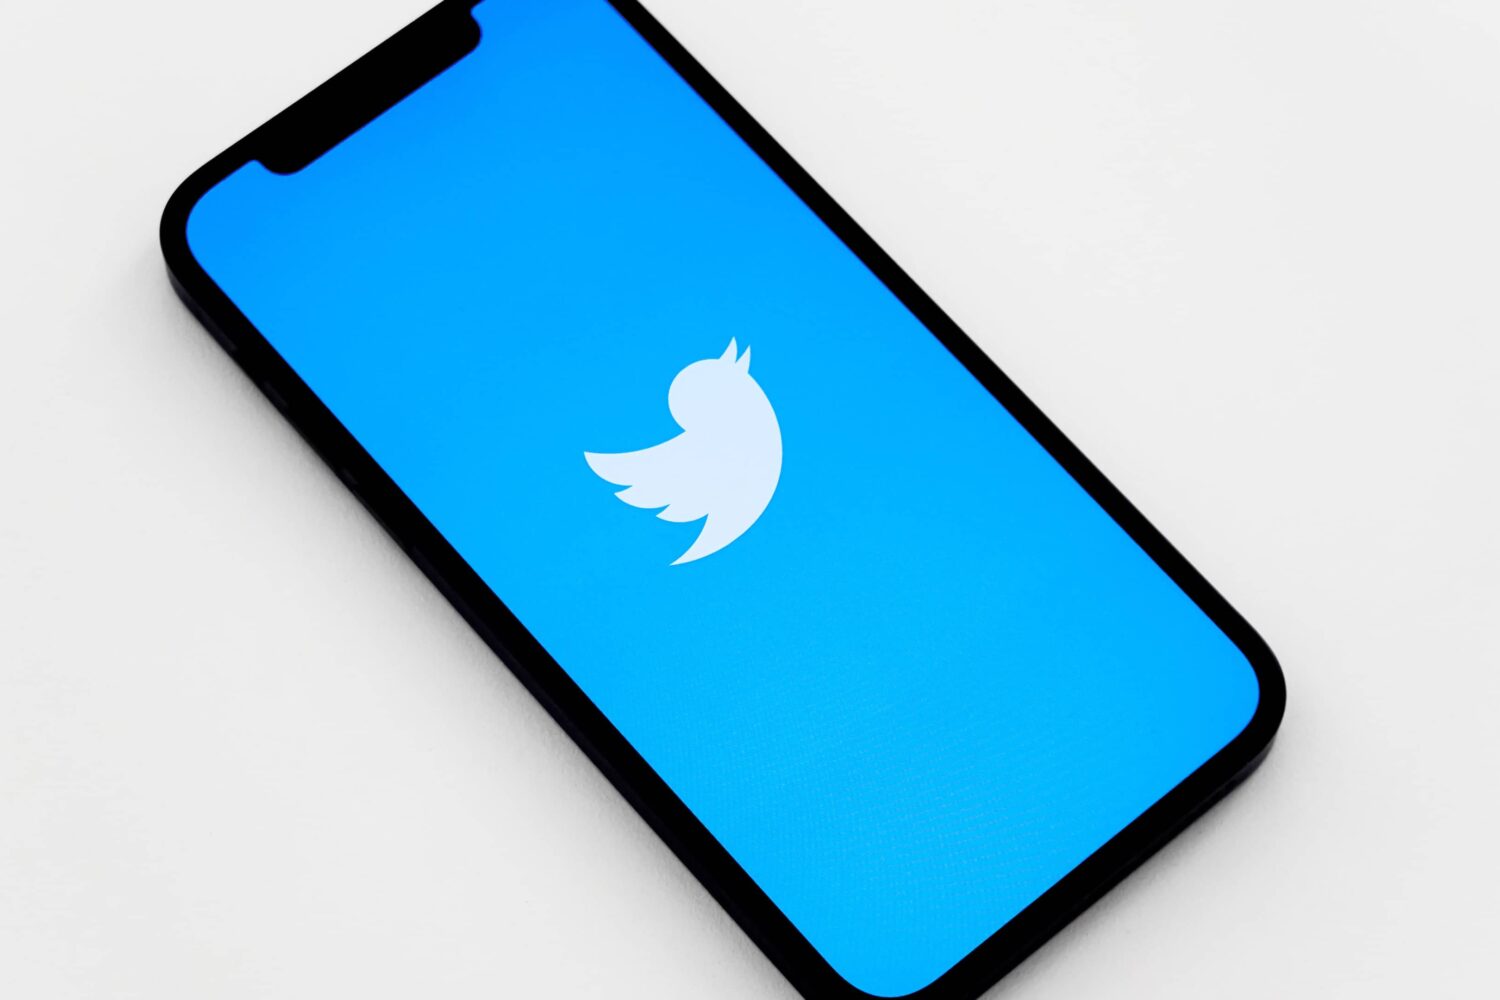 Isometric view of an iPhone showing a white Twitter bird logo on the screen, set against a sold light-blue background